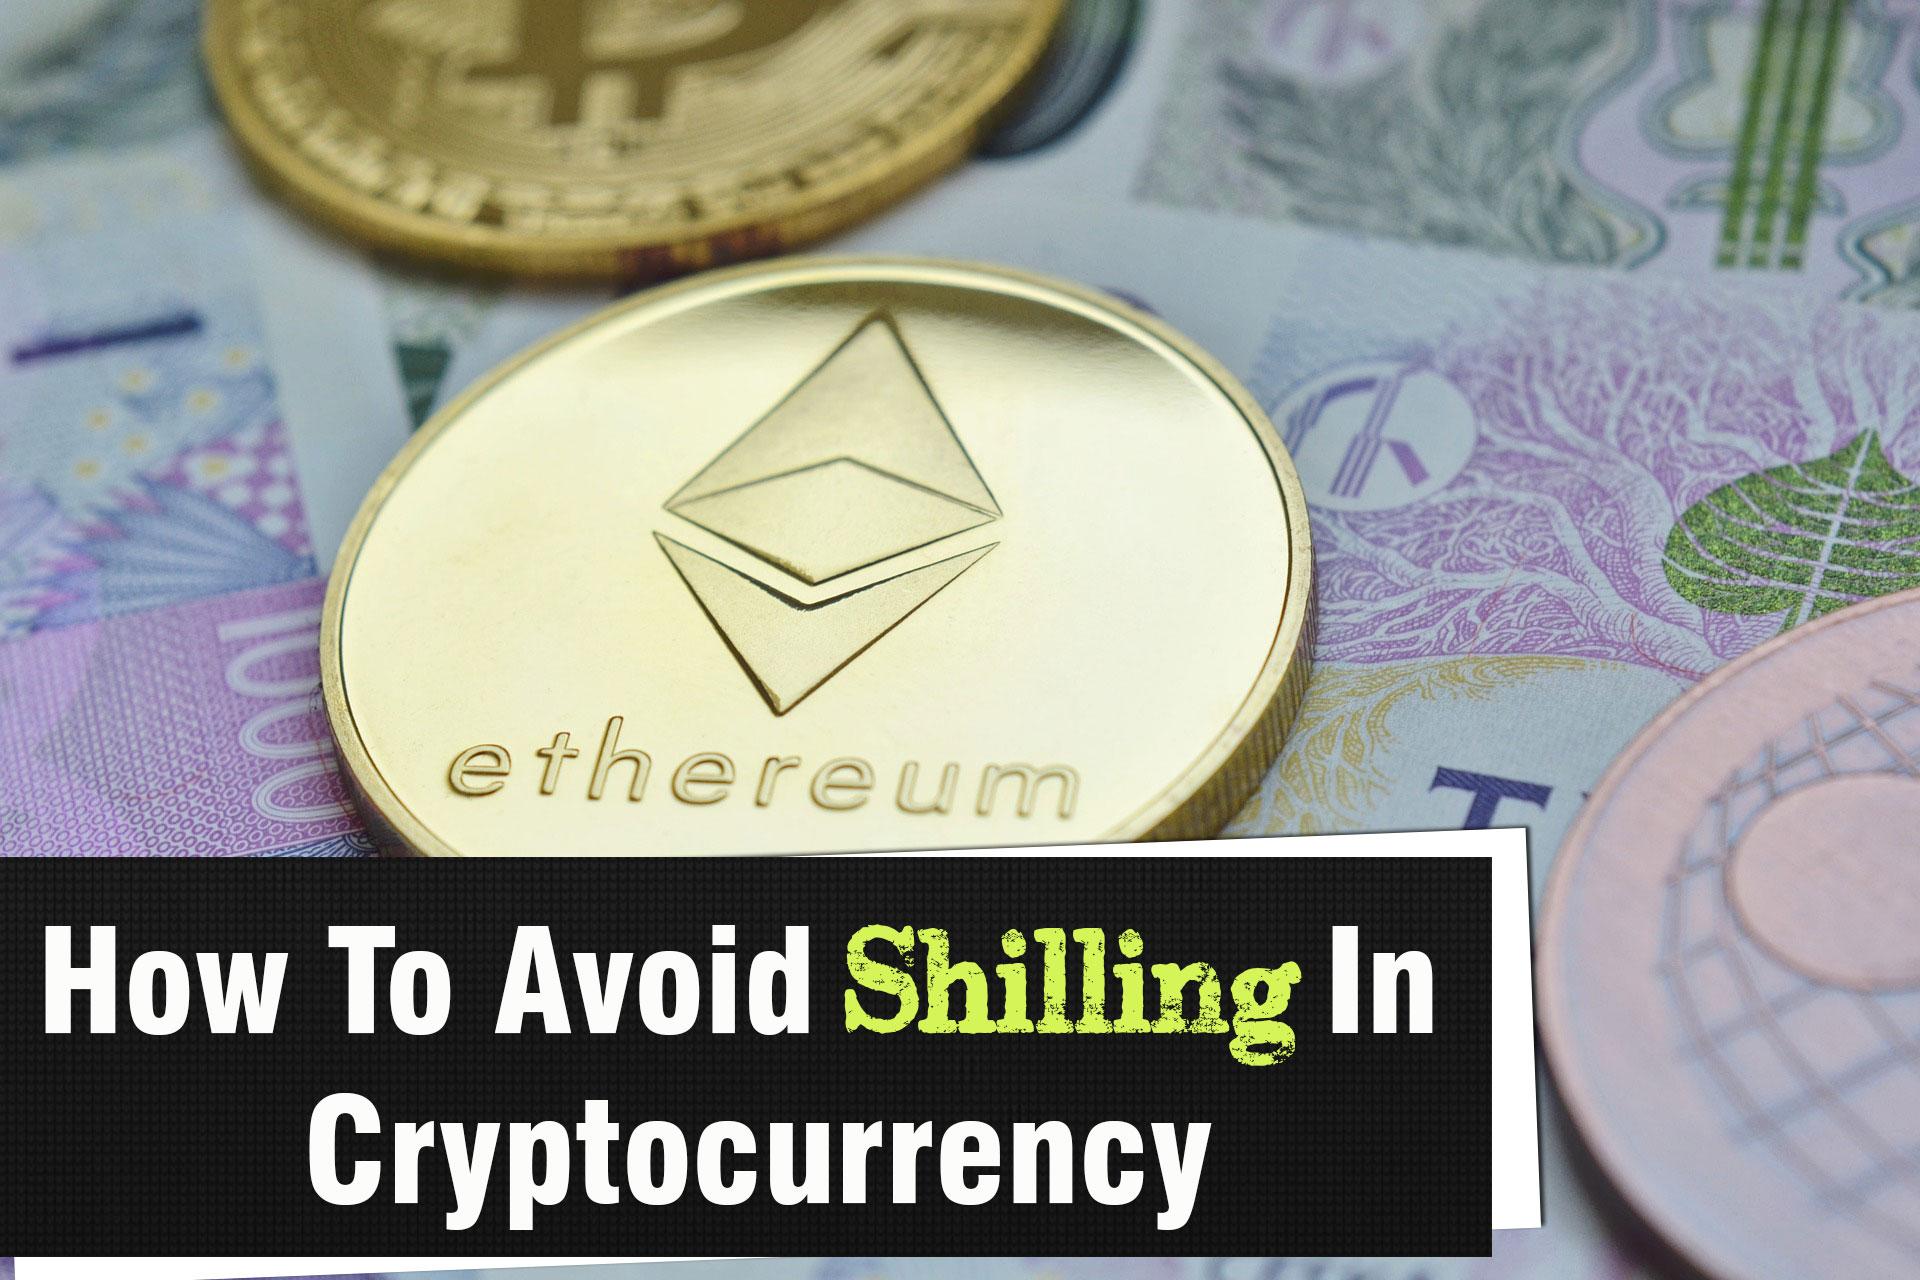 Shilling in cryptocurrency